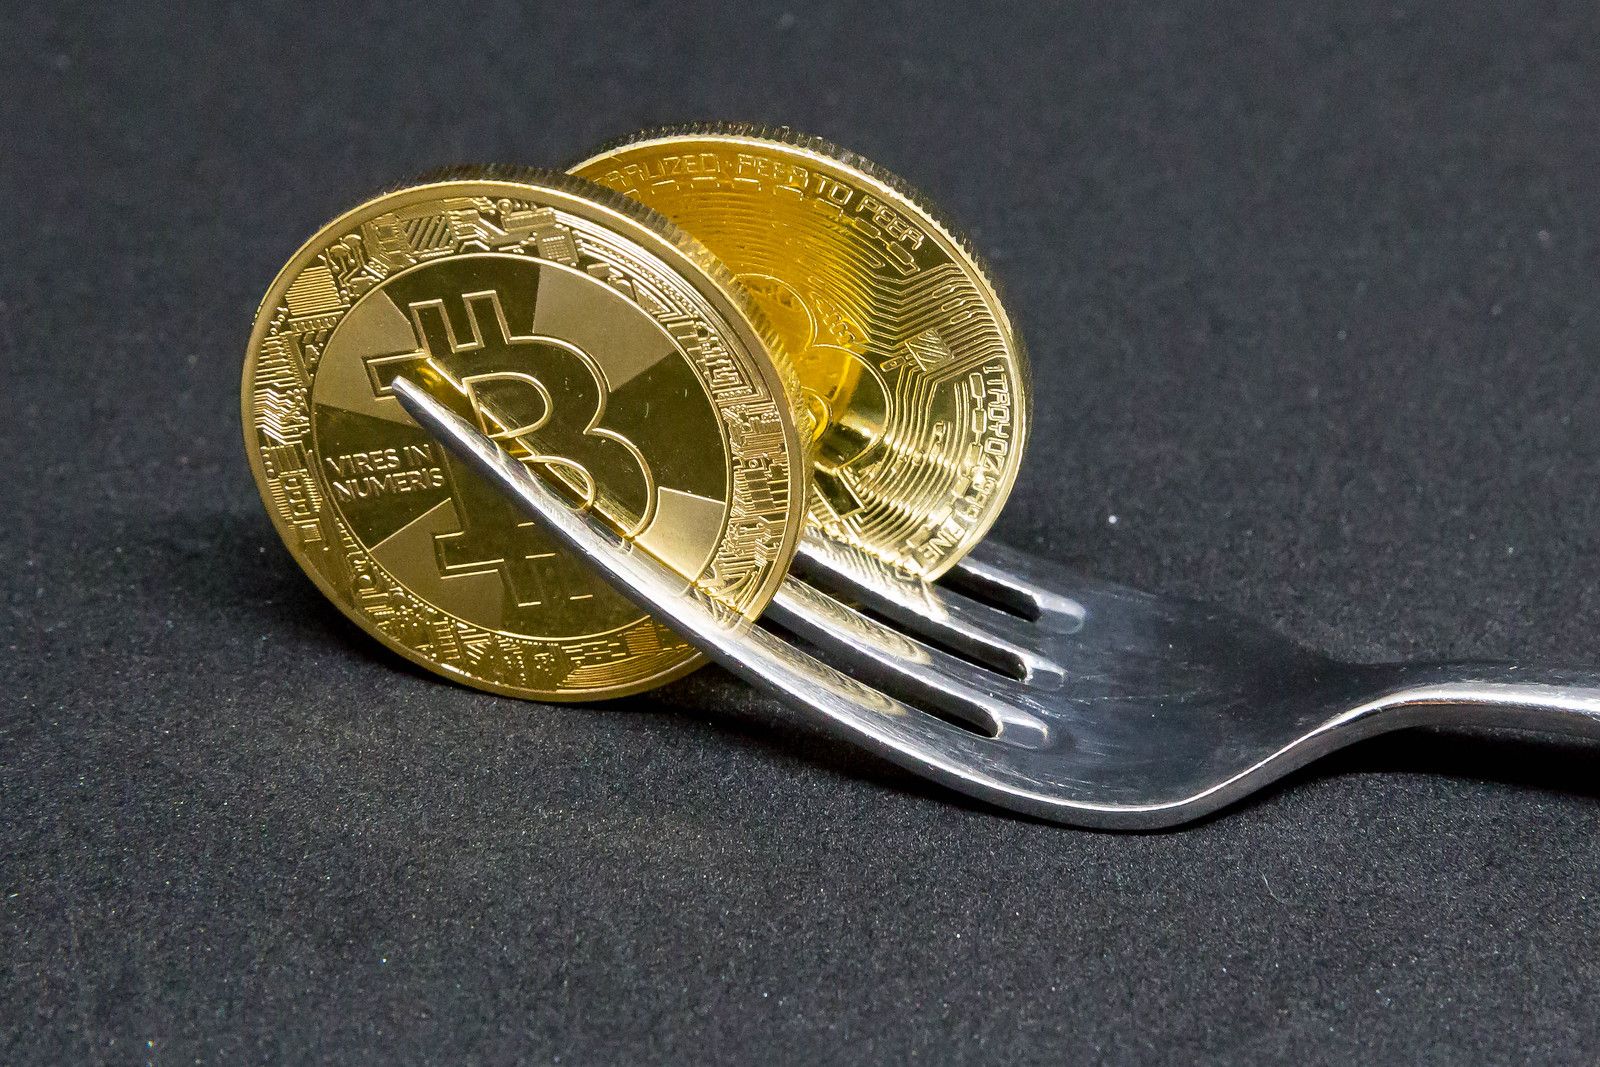 Flickr photo of two Bitcoins in between a fork